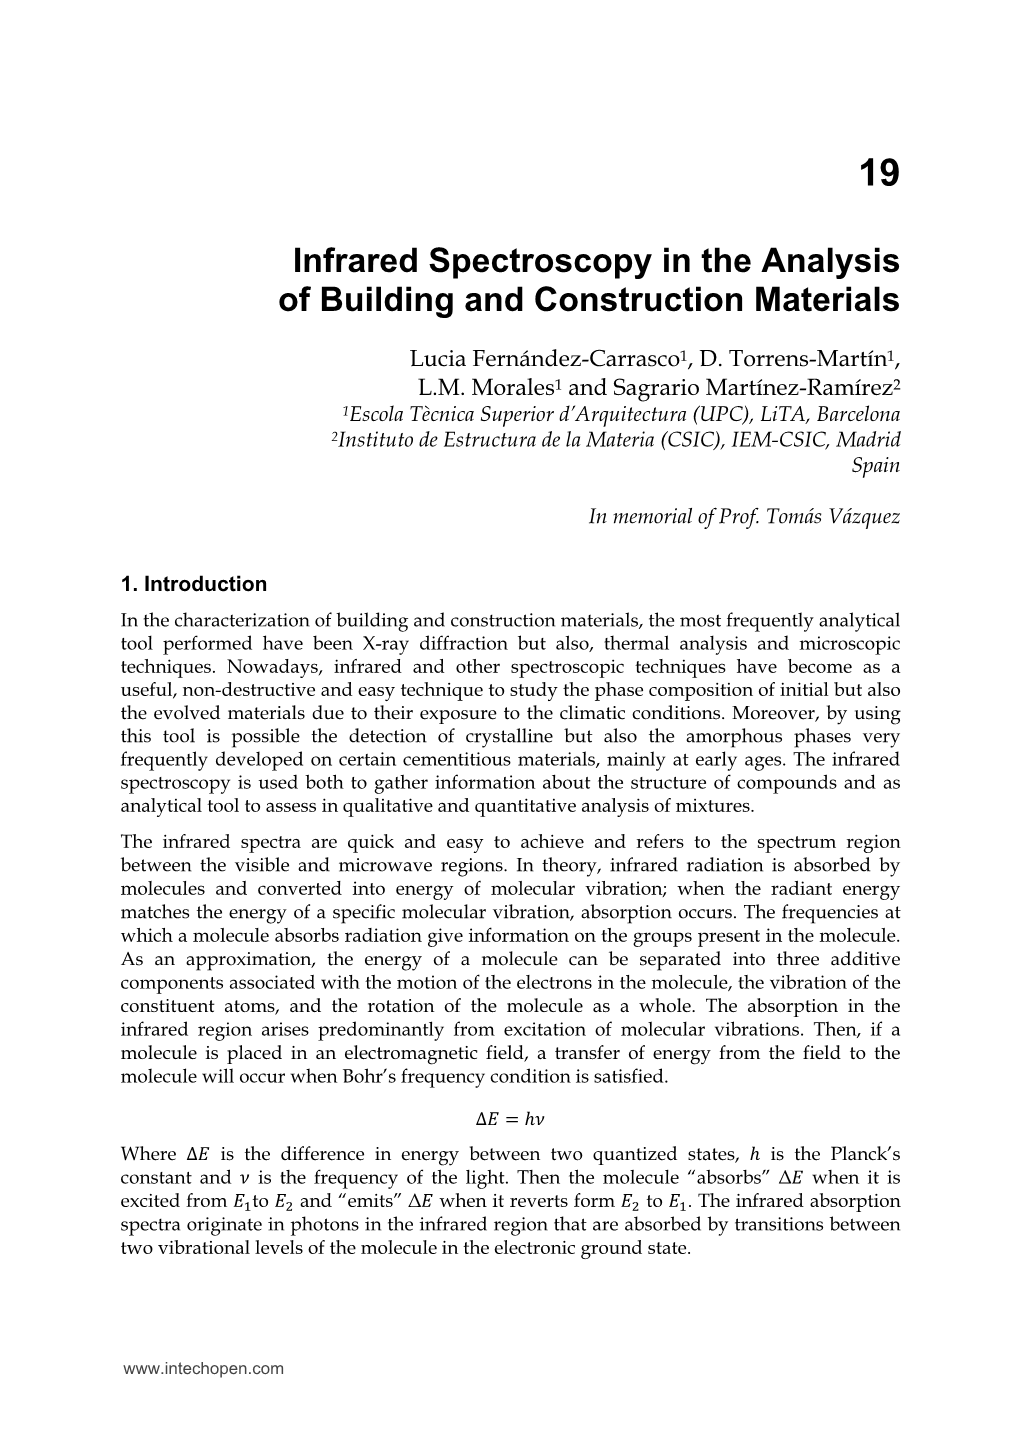 Infrared Spectroscopy in the Analysis of Building and Construction Materials